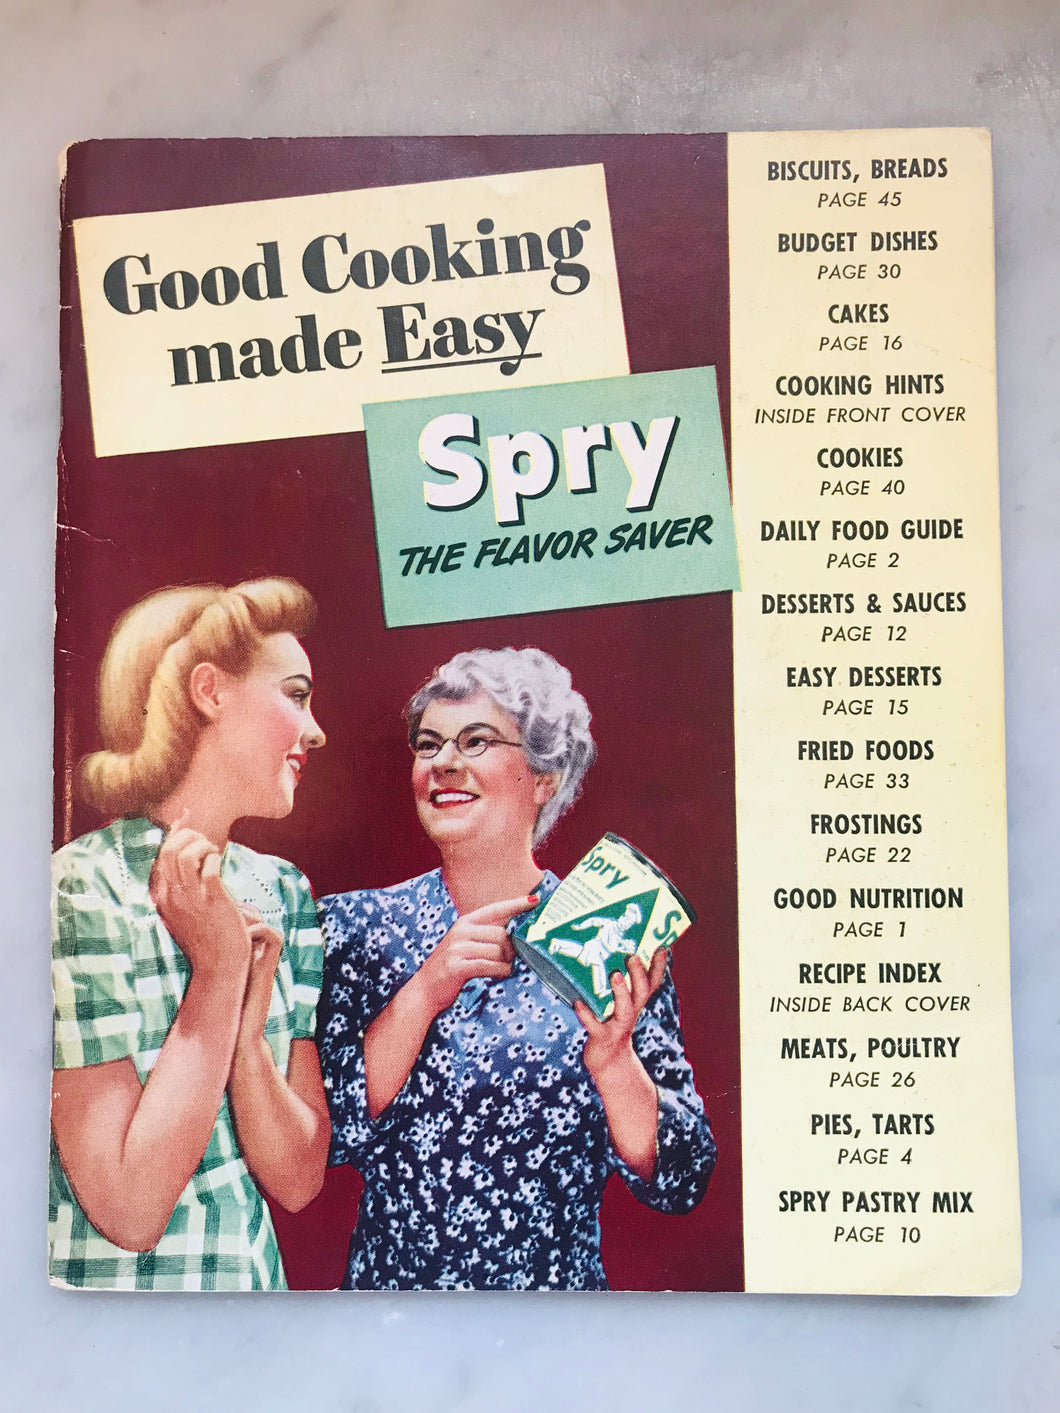 Good Cooking Made Easy by Spry, The Flavor Saver